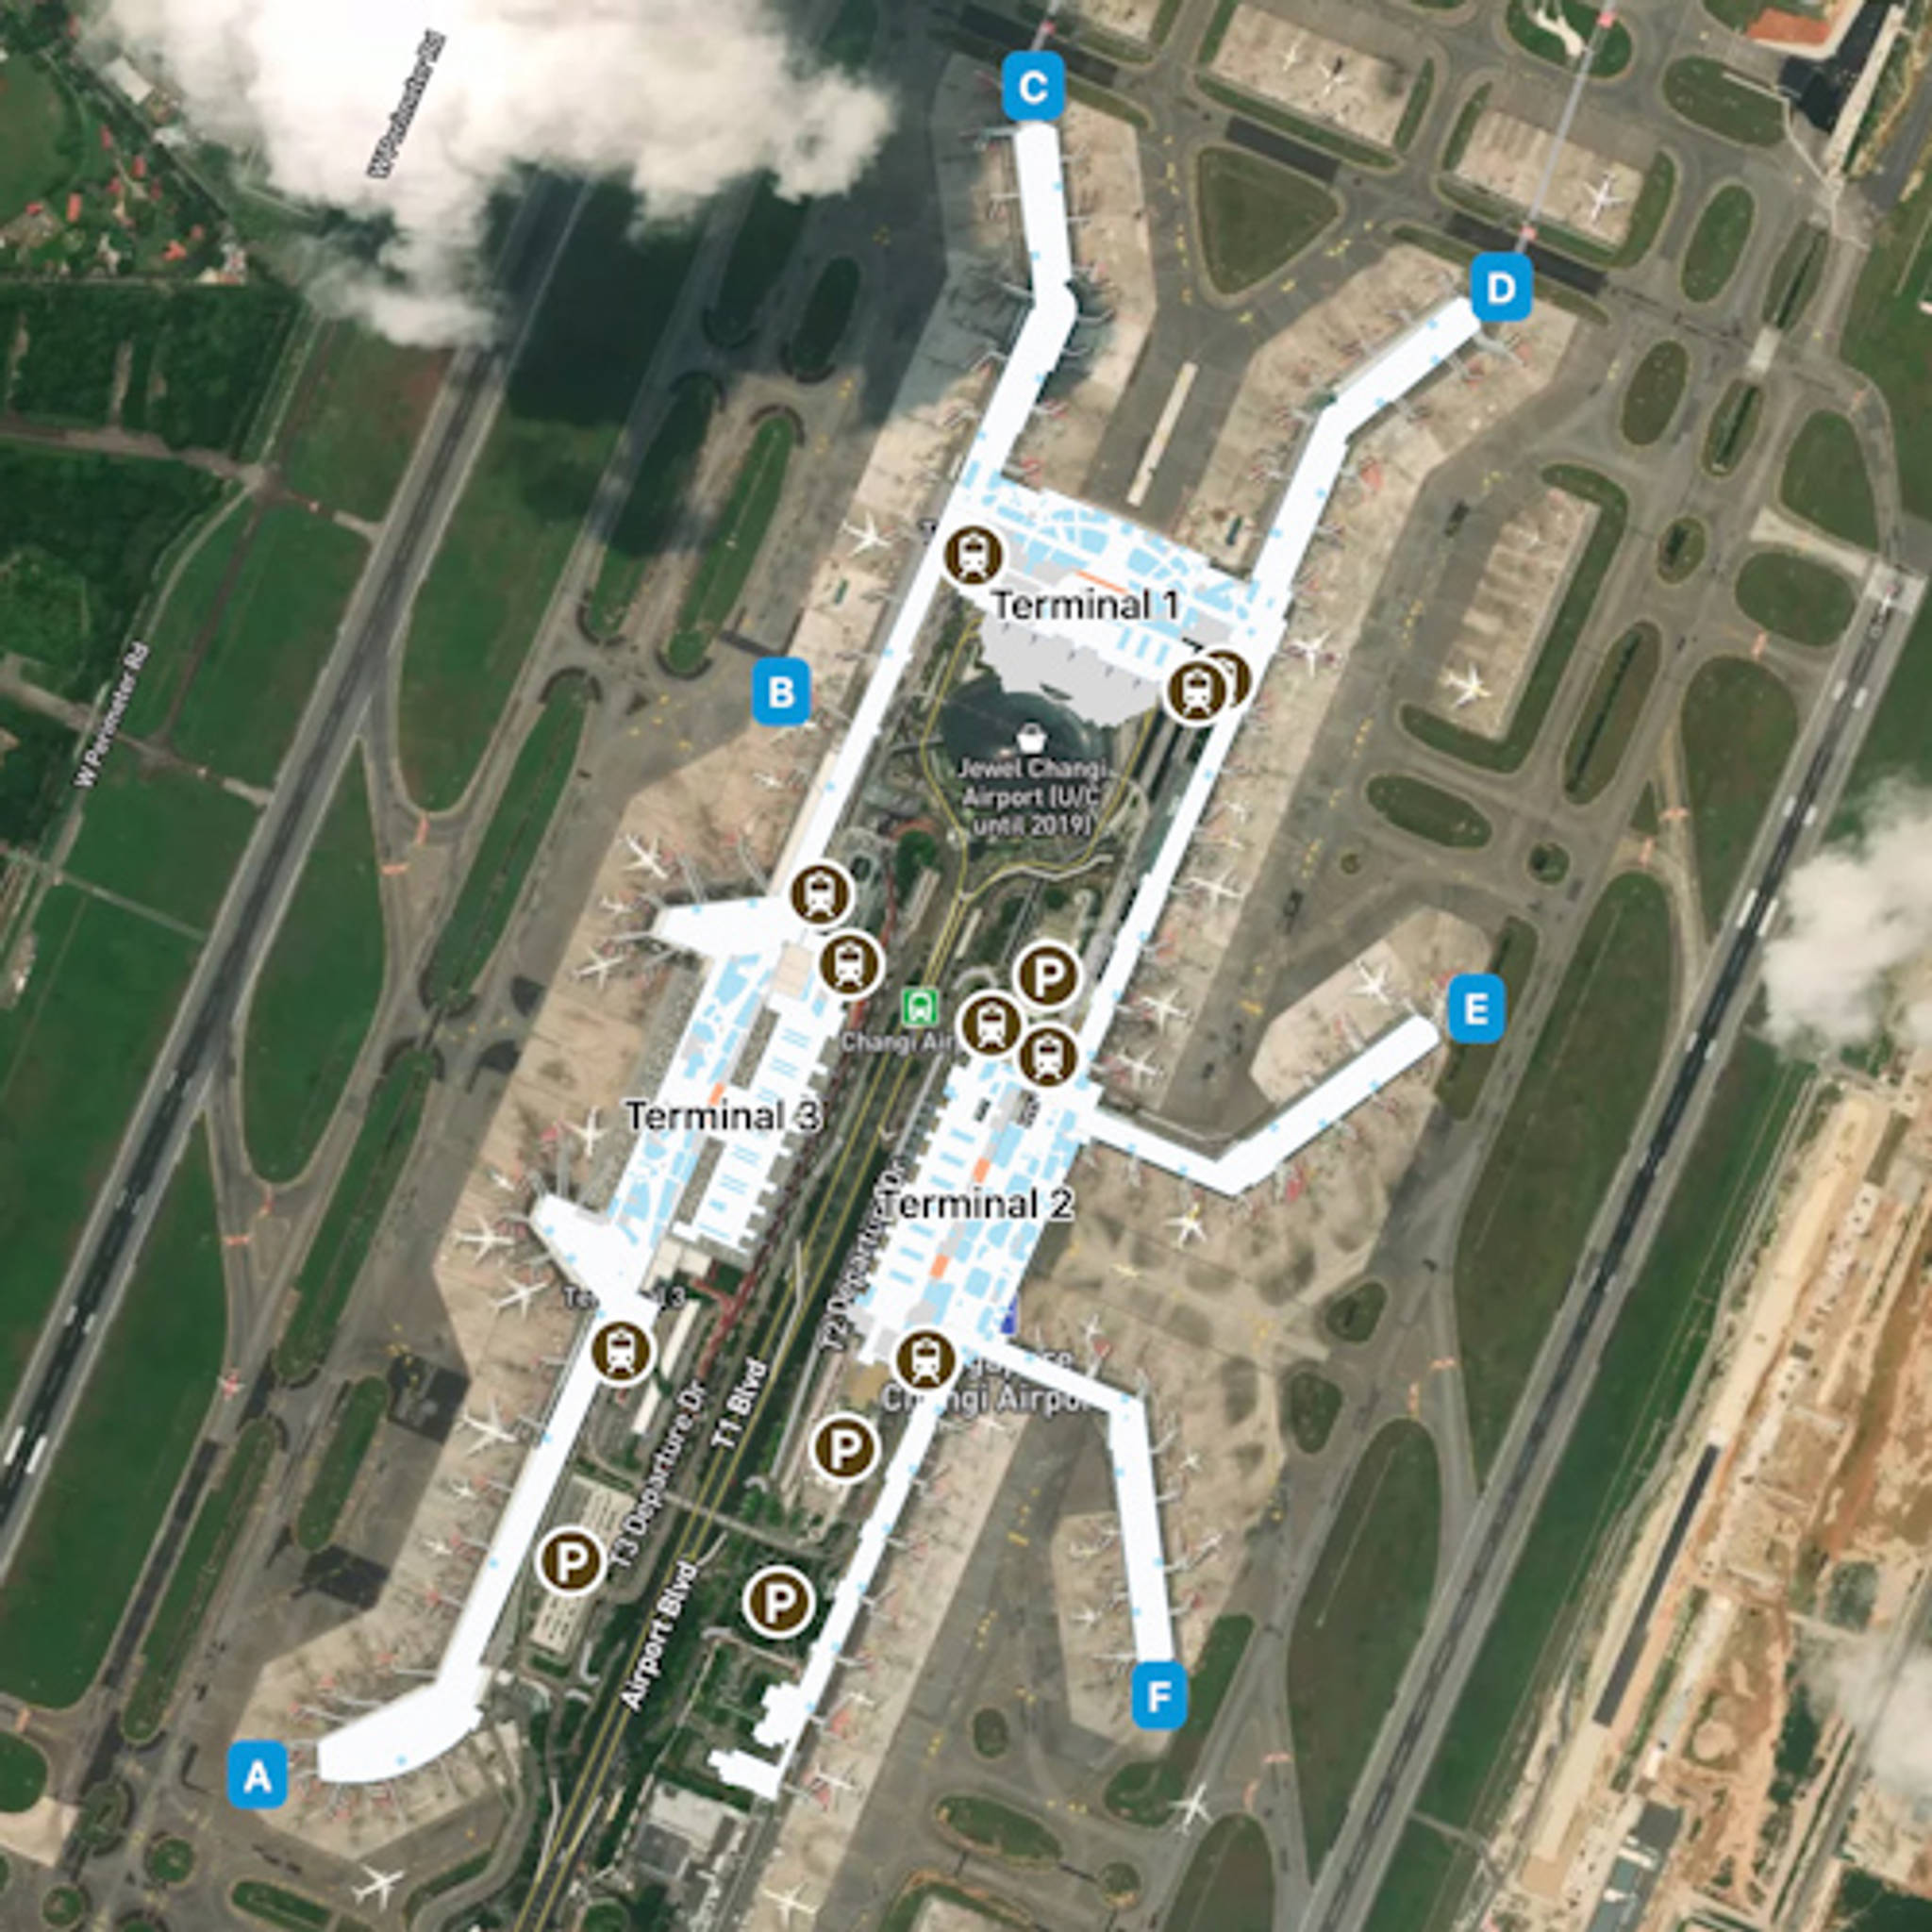 Singapore Changi Airport SIN Terminal Overview Map